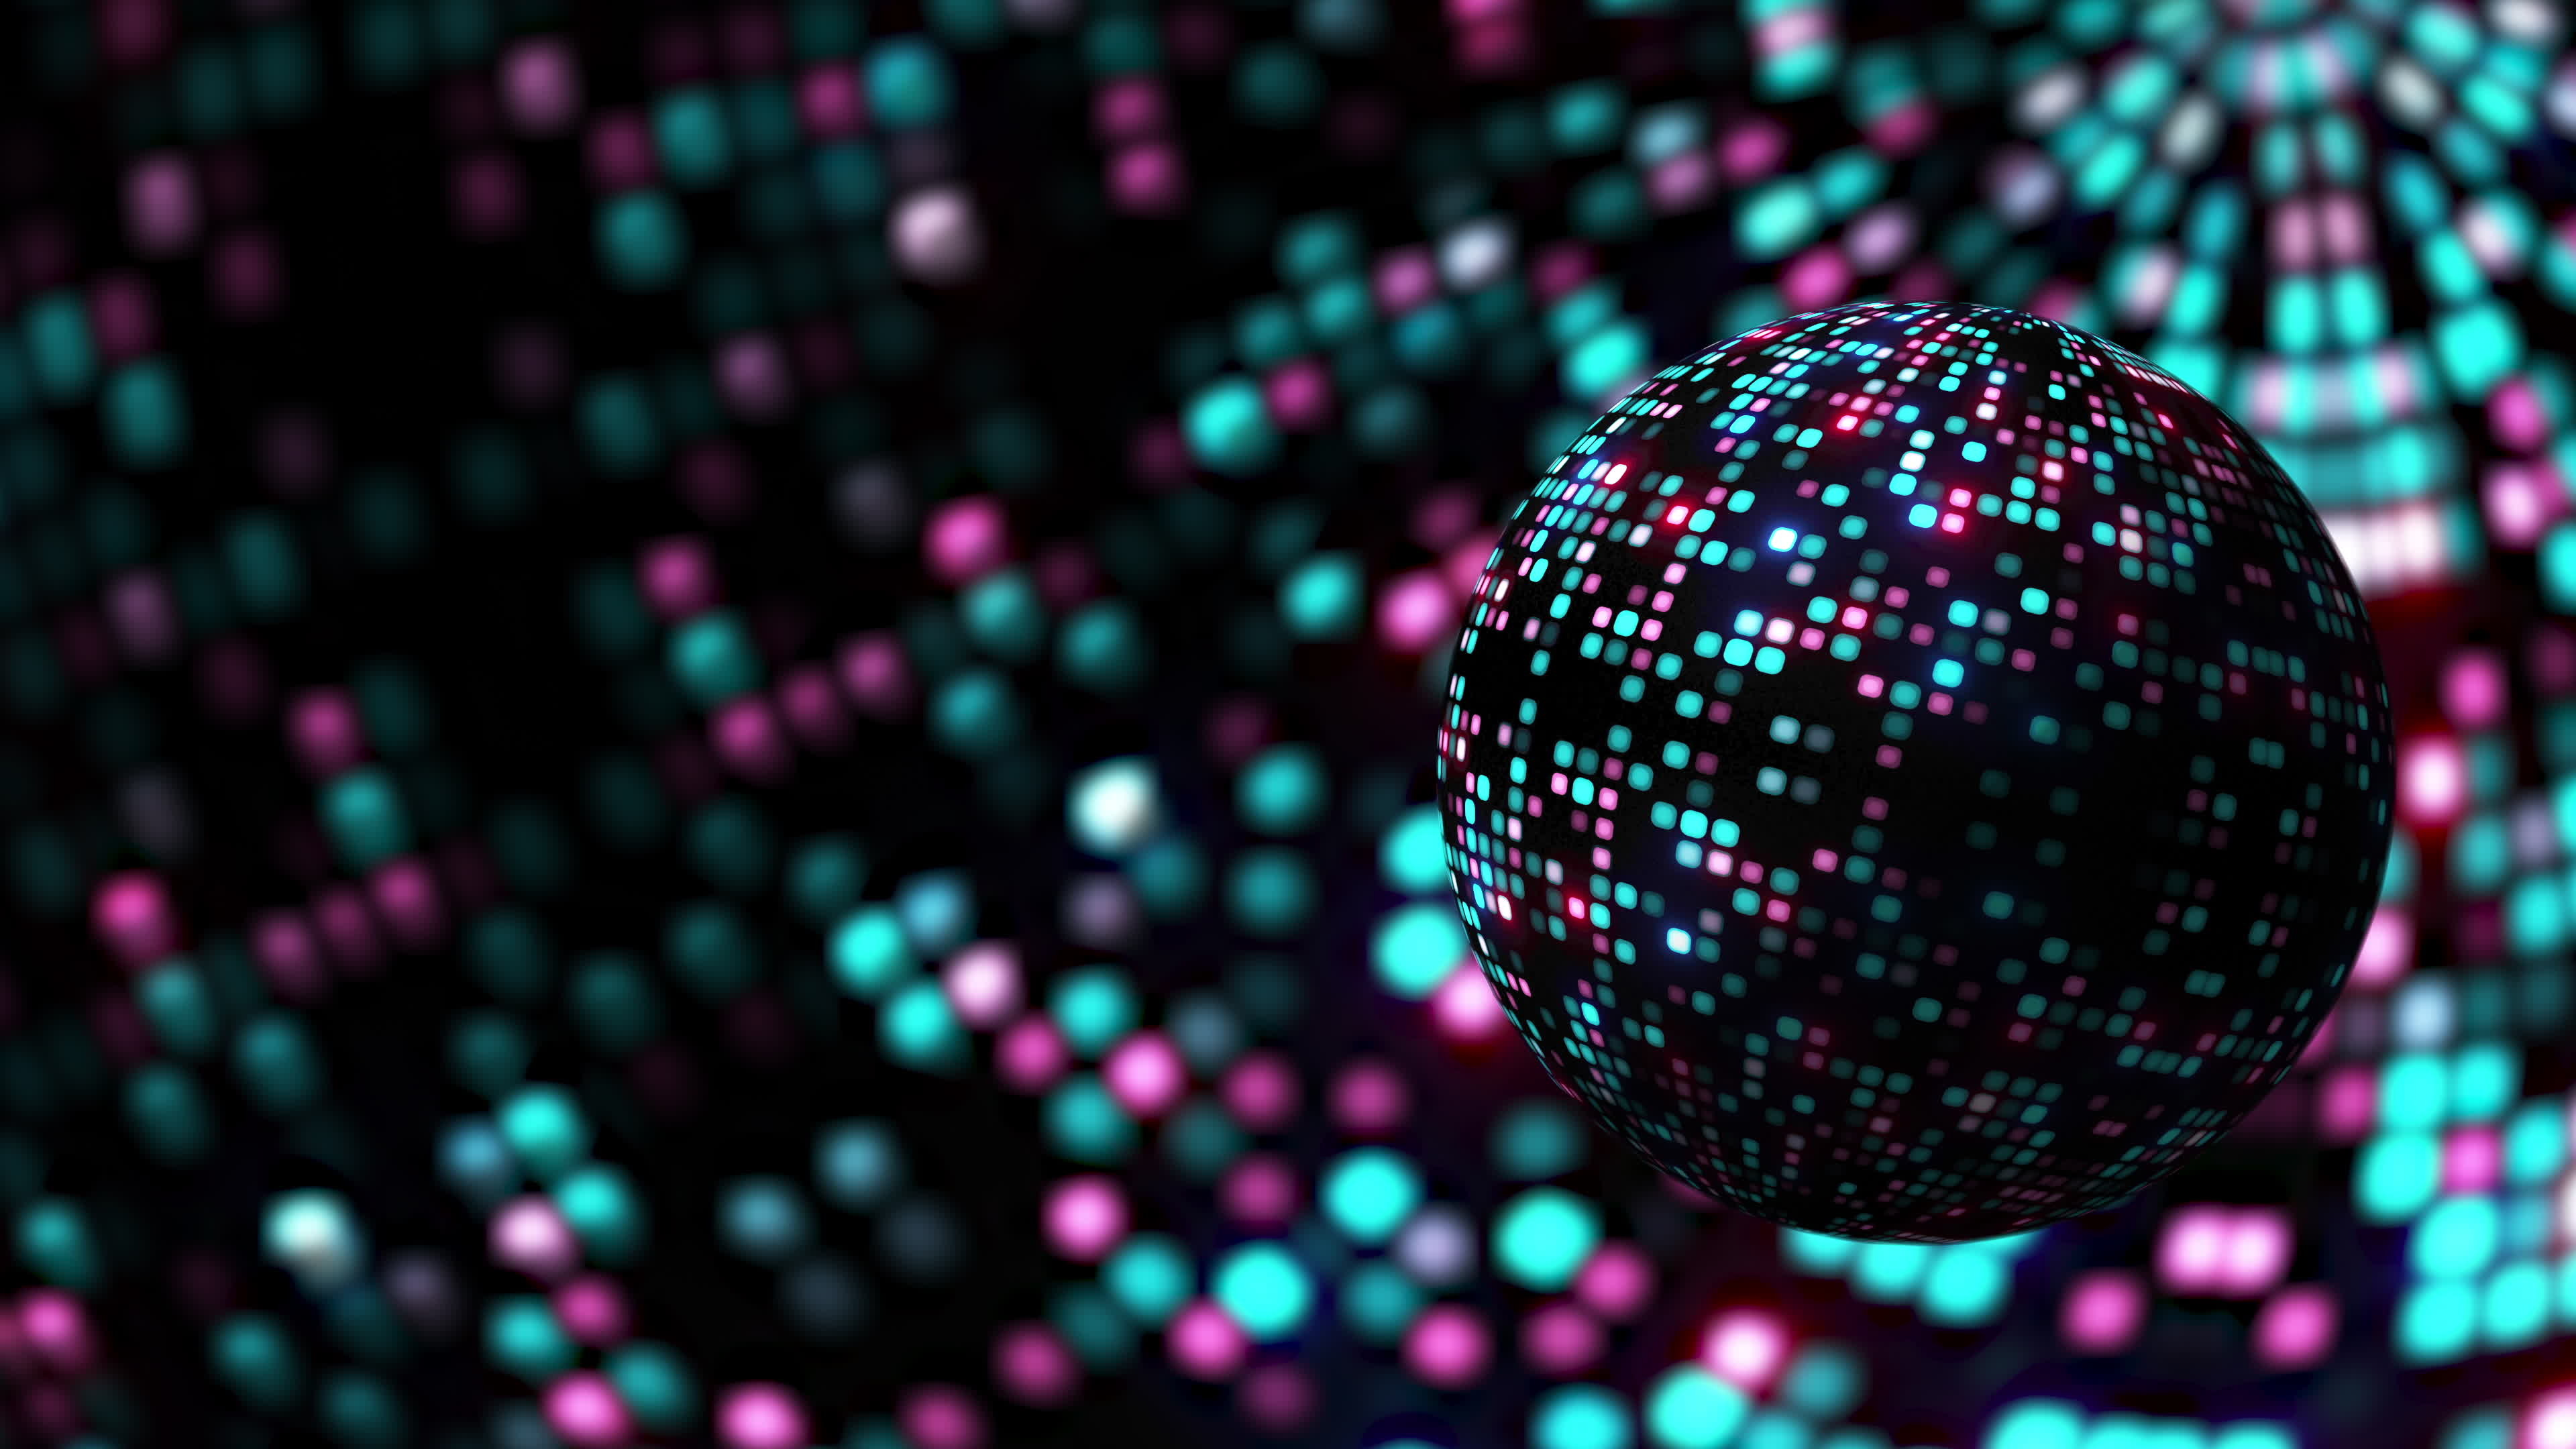 Disco: Glowing neon disco ball, Reflecting light directed at it in many directions. 3840x2160 4K Wallpaper.